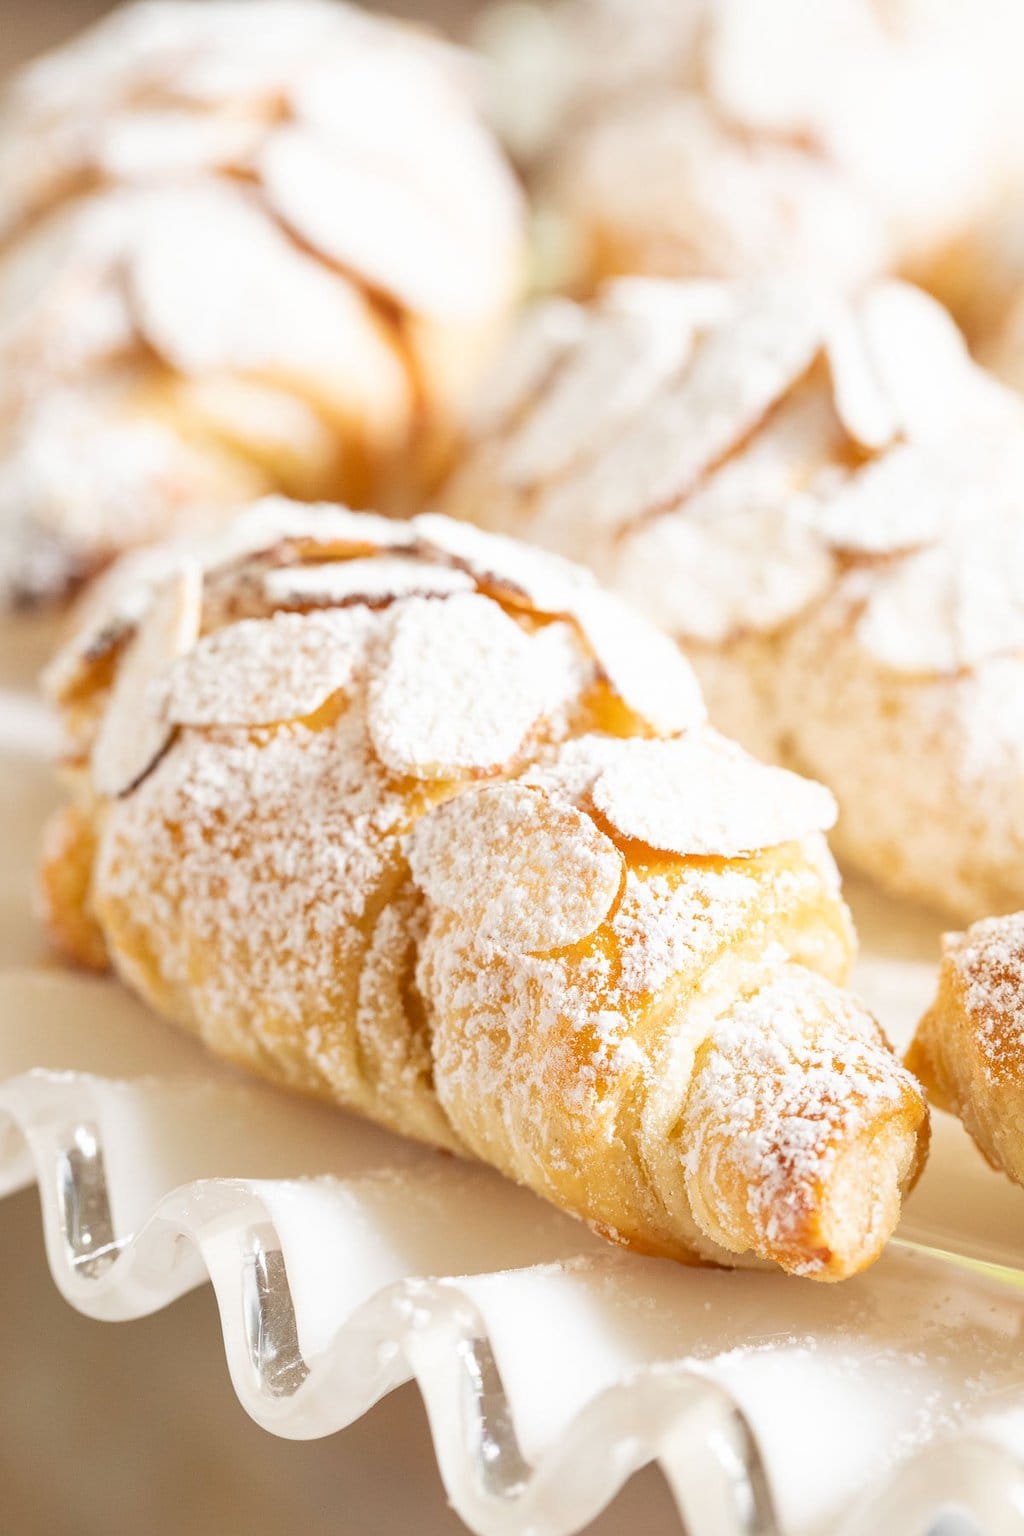 Vertical extreme closeup photo of Easy Almond Croissants on a scalloped glass serving plate.